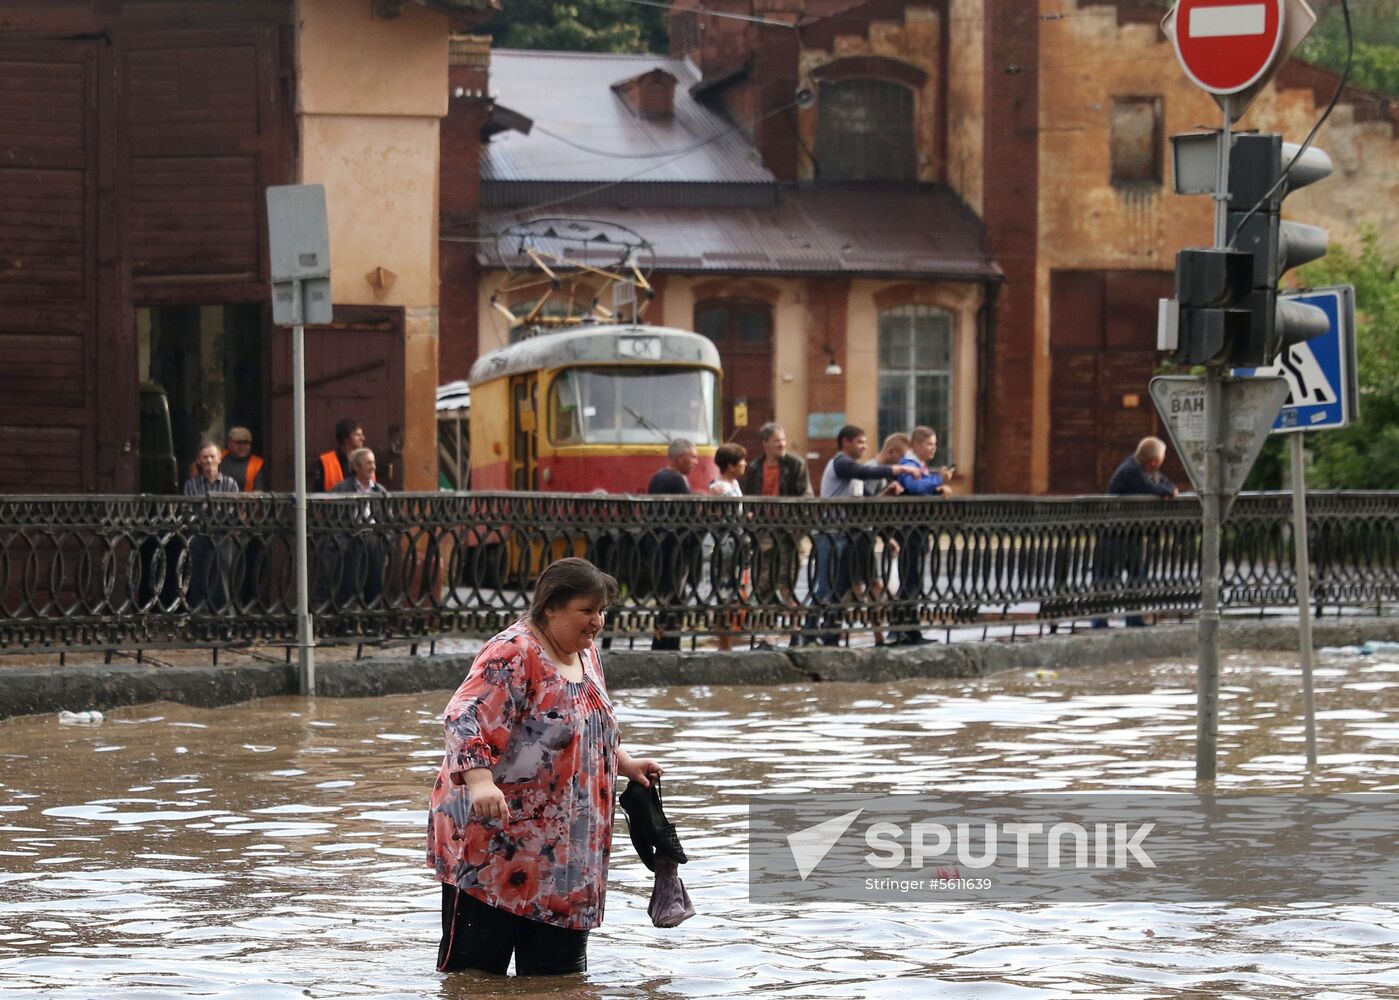 Aftermath of heavy rains in Lvov